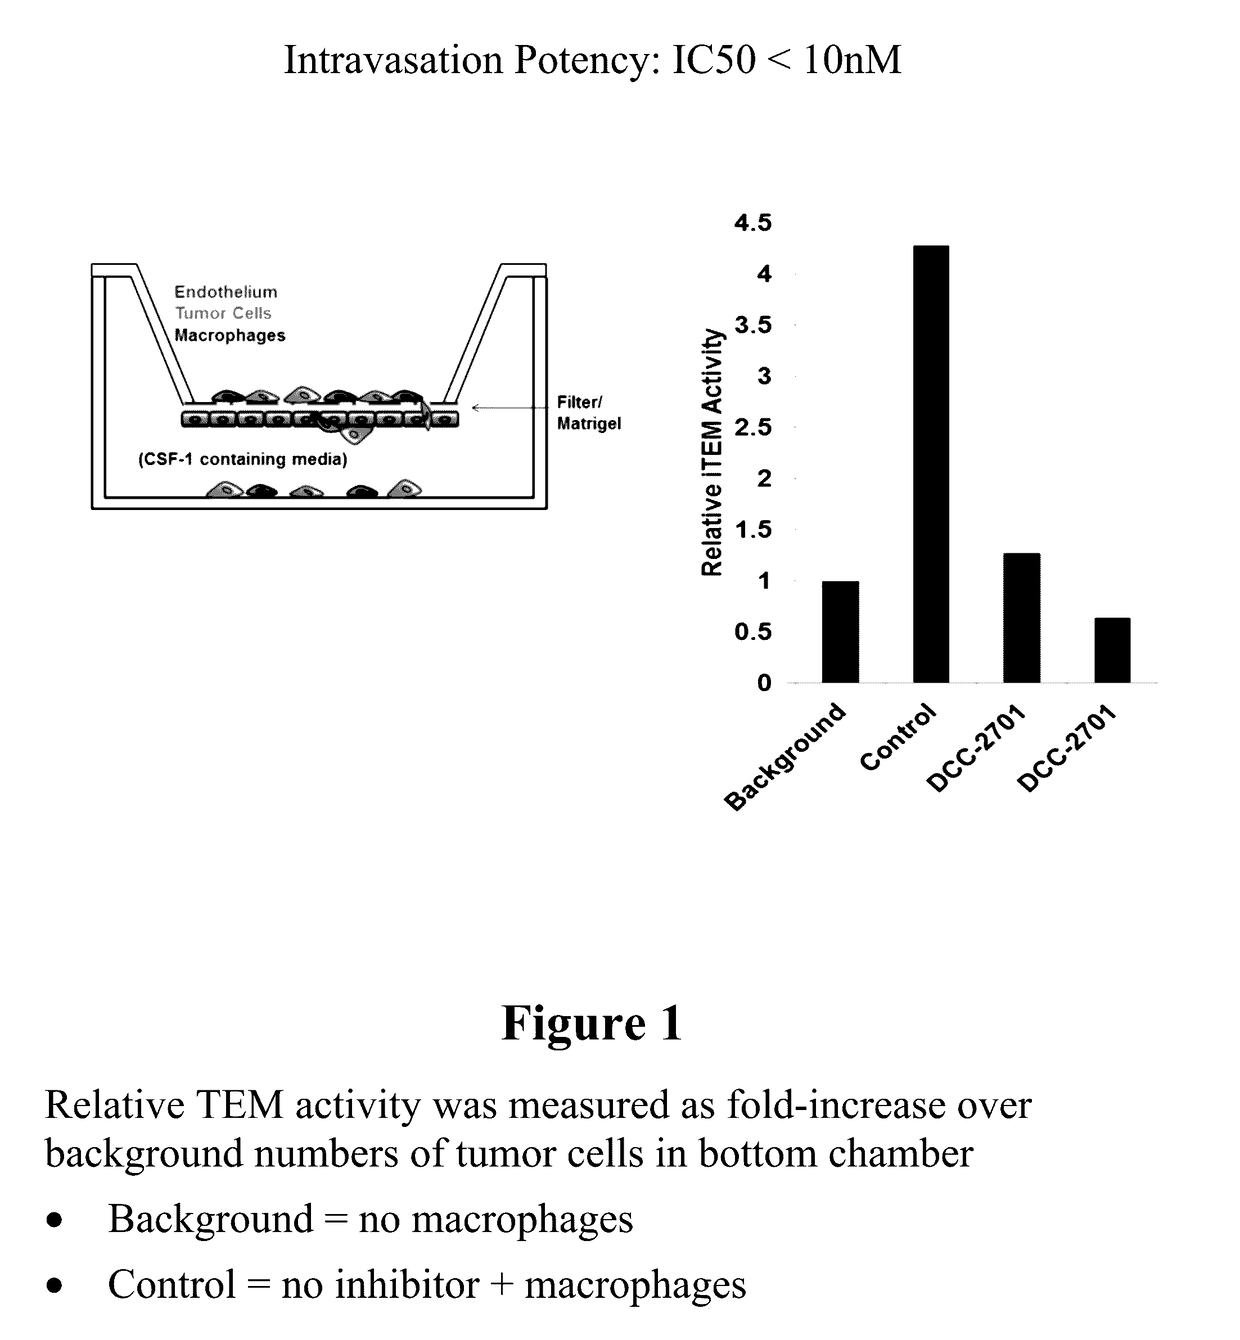 Inhibition of tumor cell interactions with the microenvironment resulting in a reduction in tumor growth and disease progression